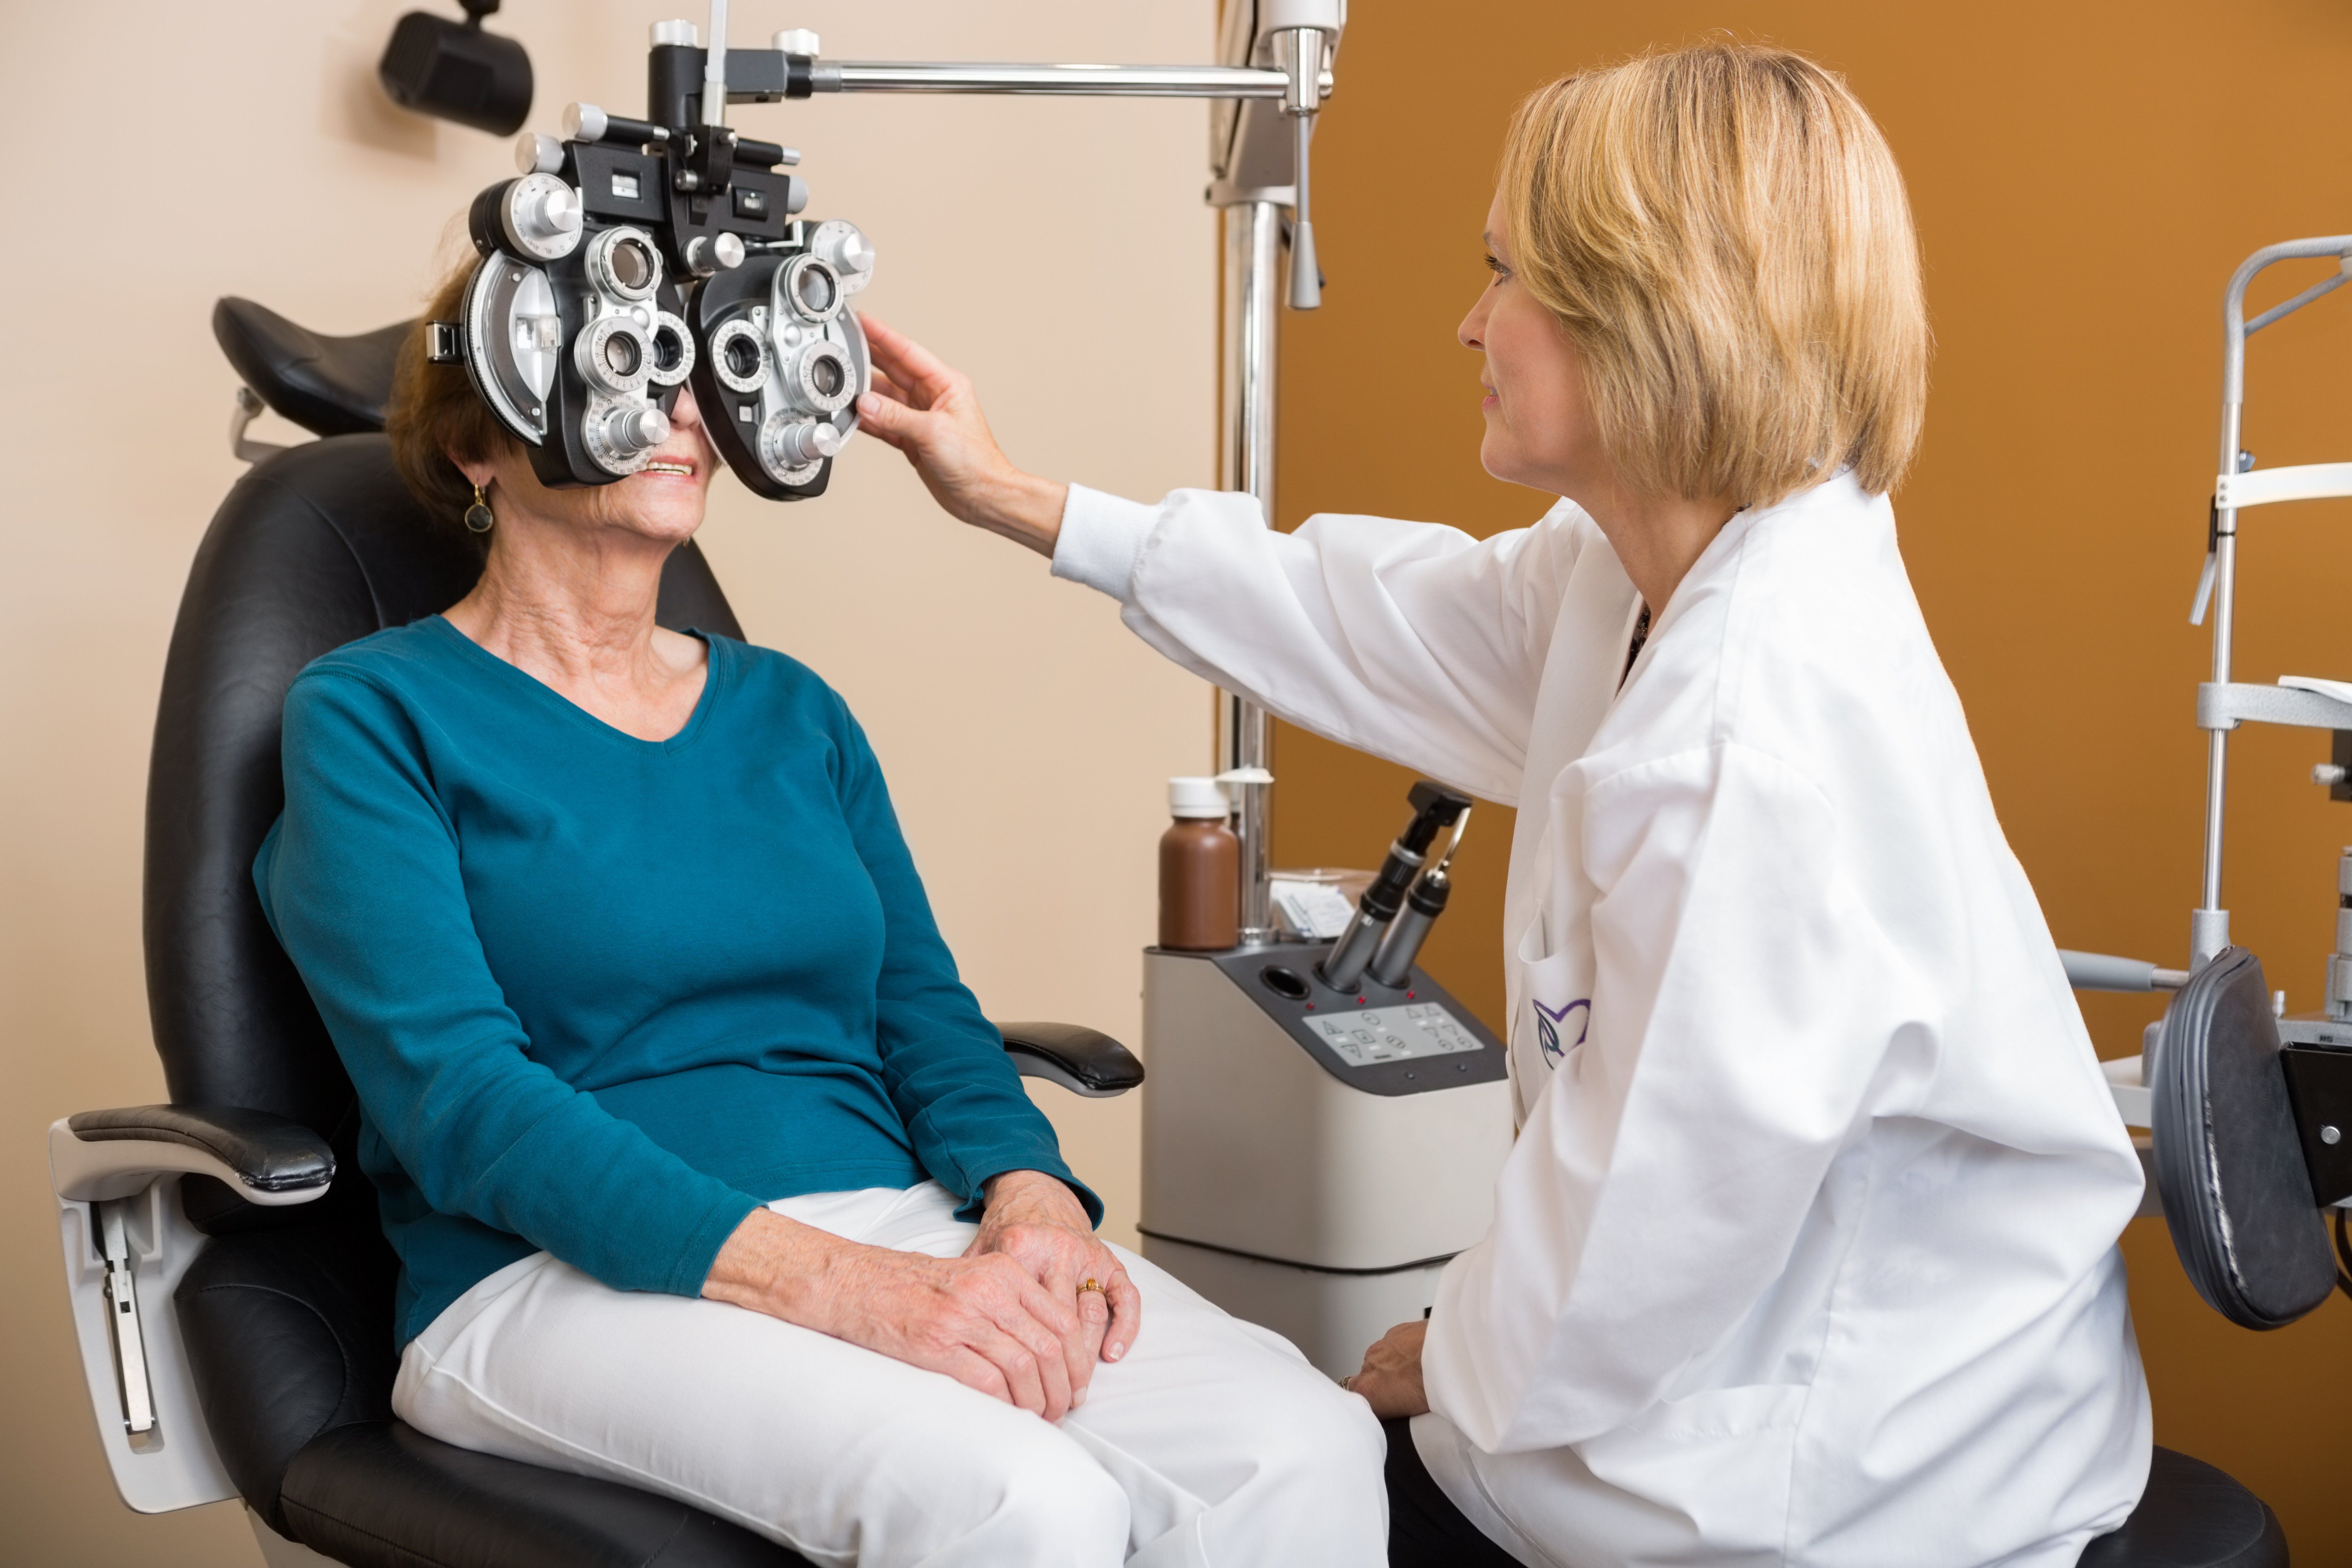 8 Ways to Prepare for an Eye Exam